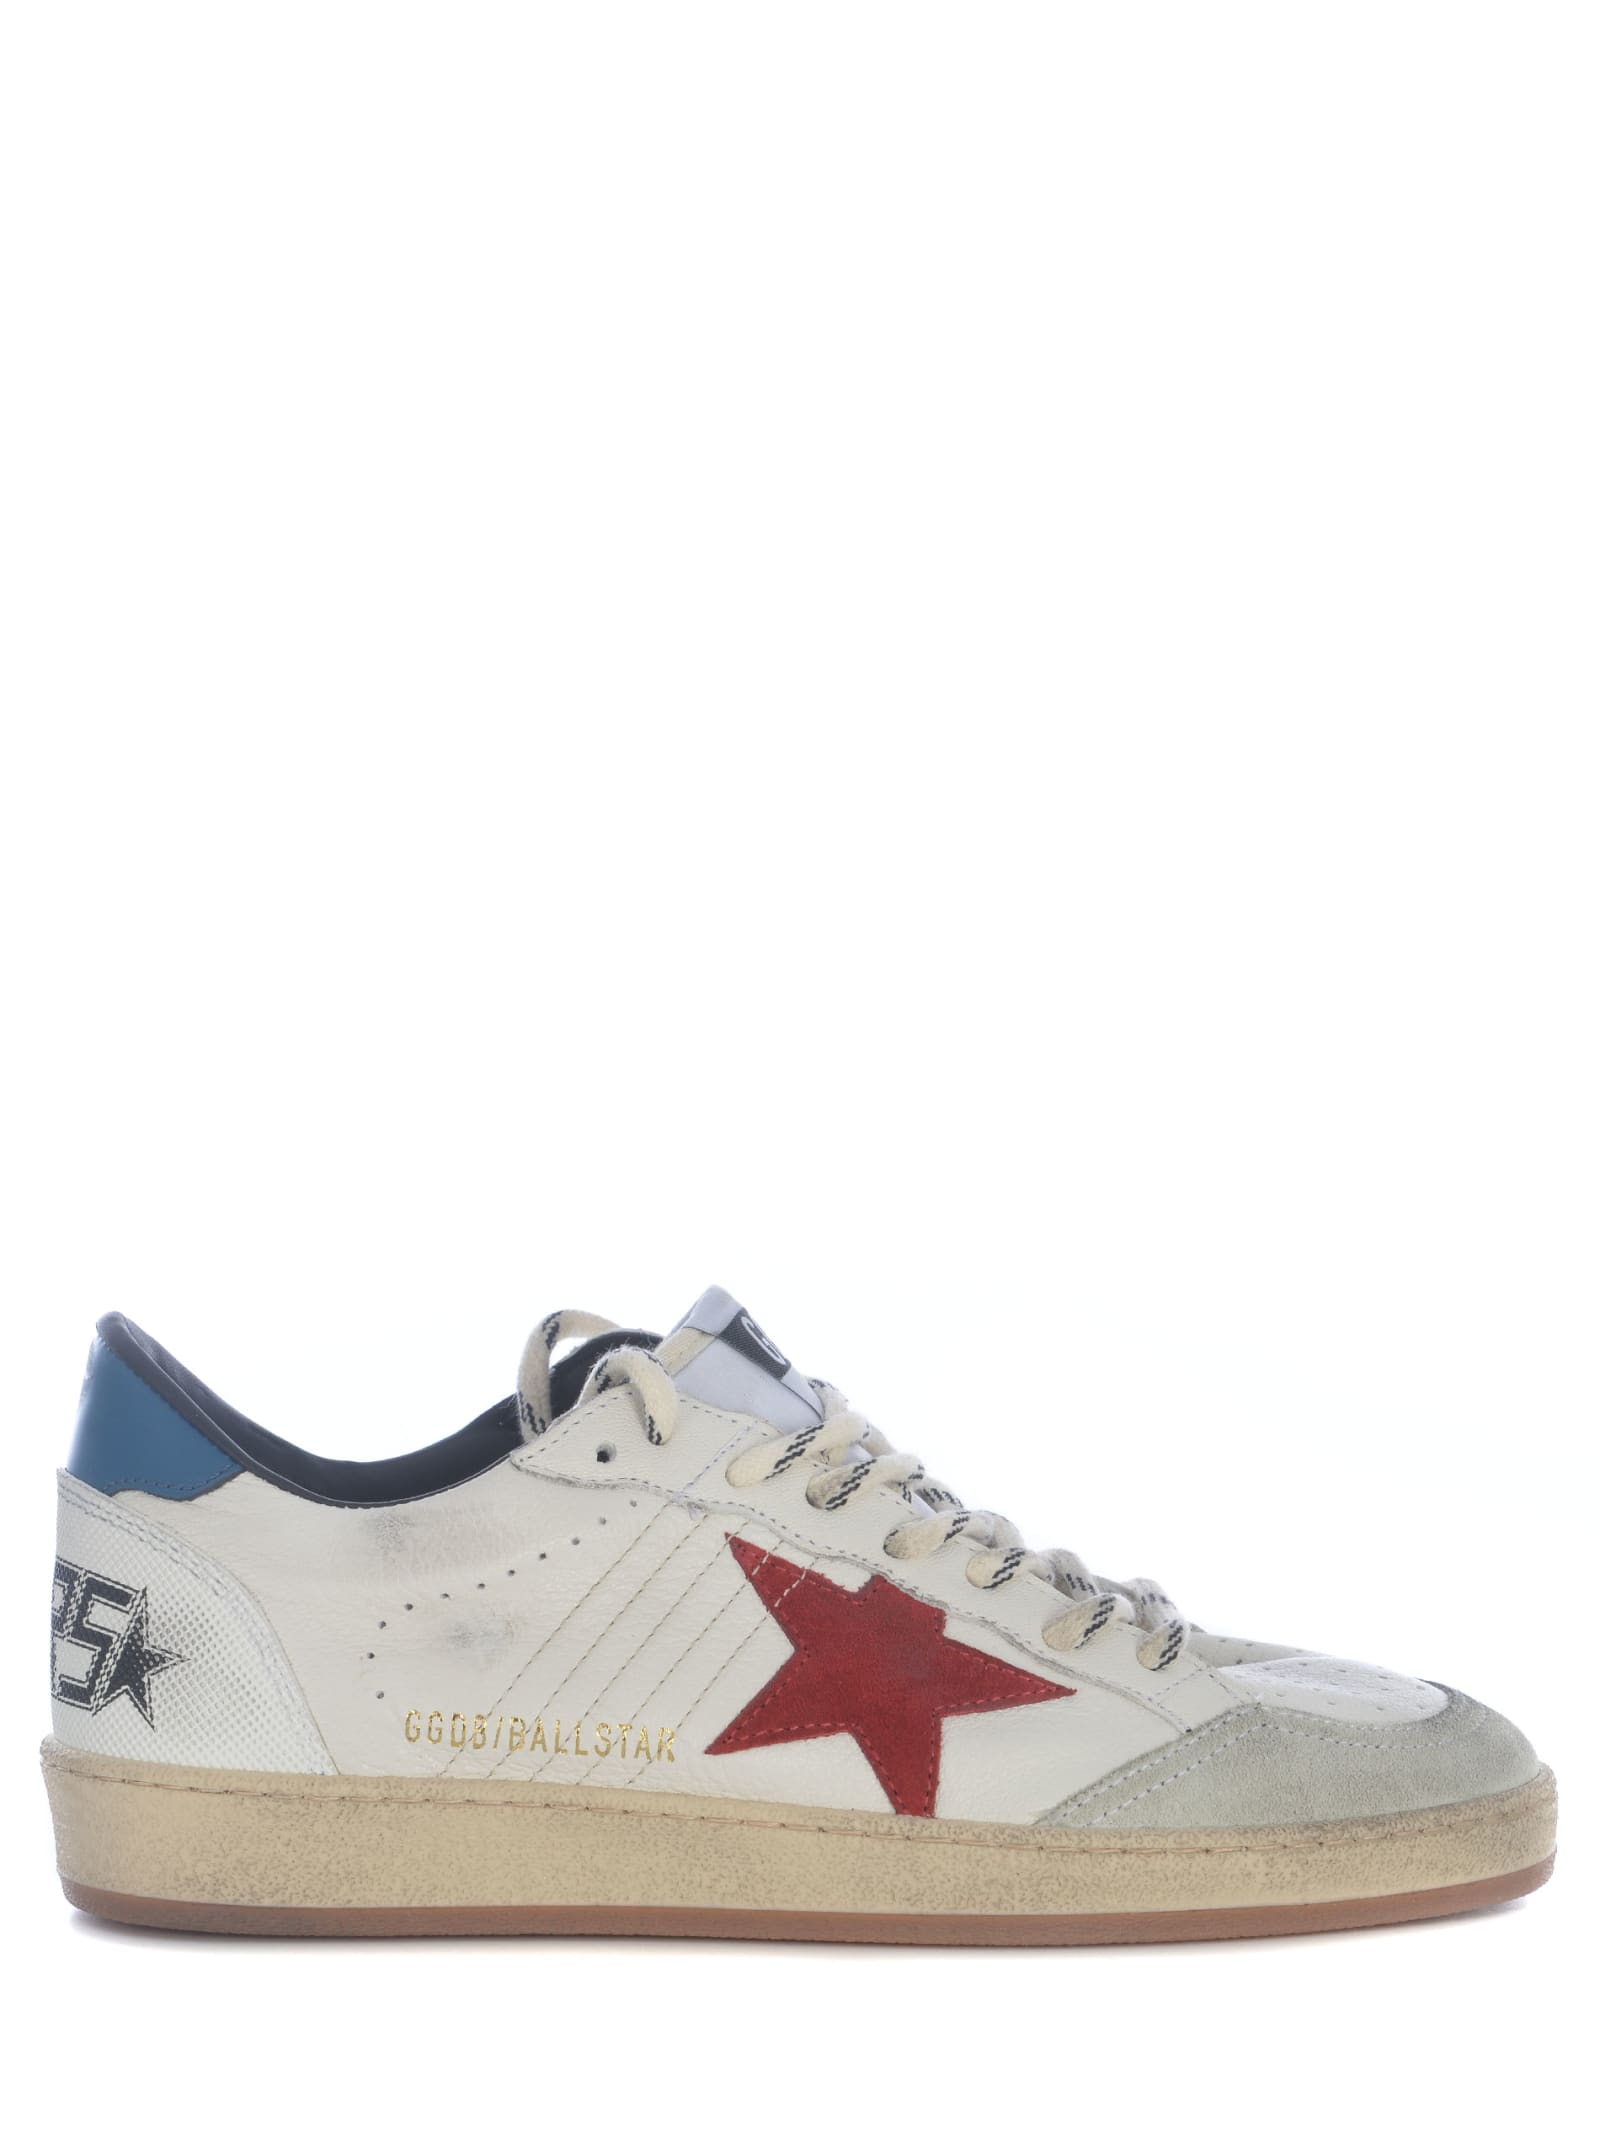 Sneakers Golden Goose ball Star Made Of Leather